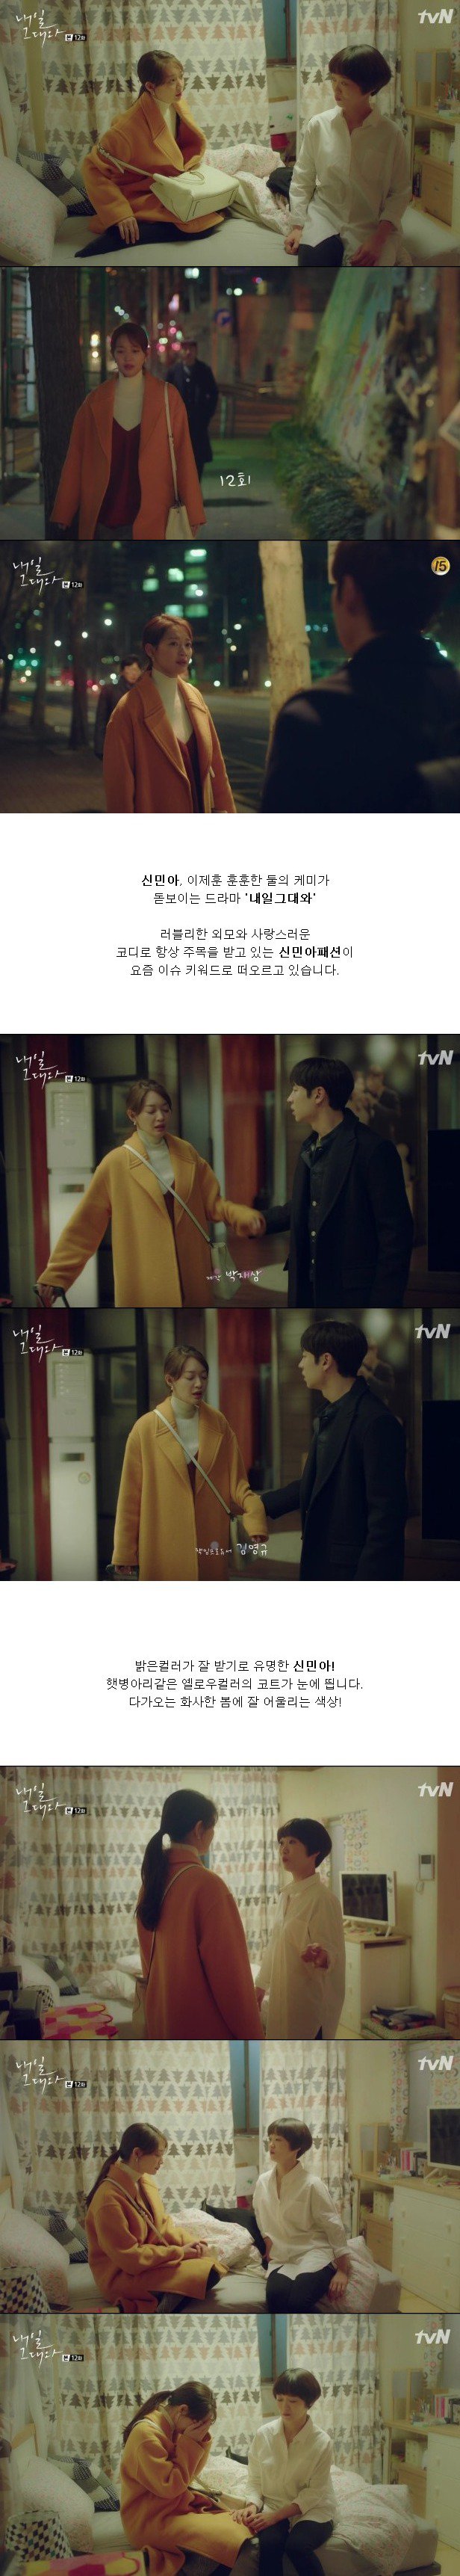 episodes 11 and 12 captures for the Korean drama 'Tomorrow With You'